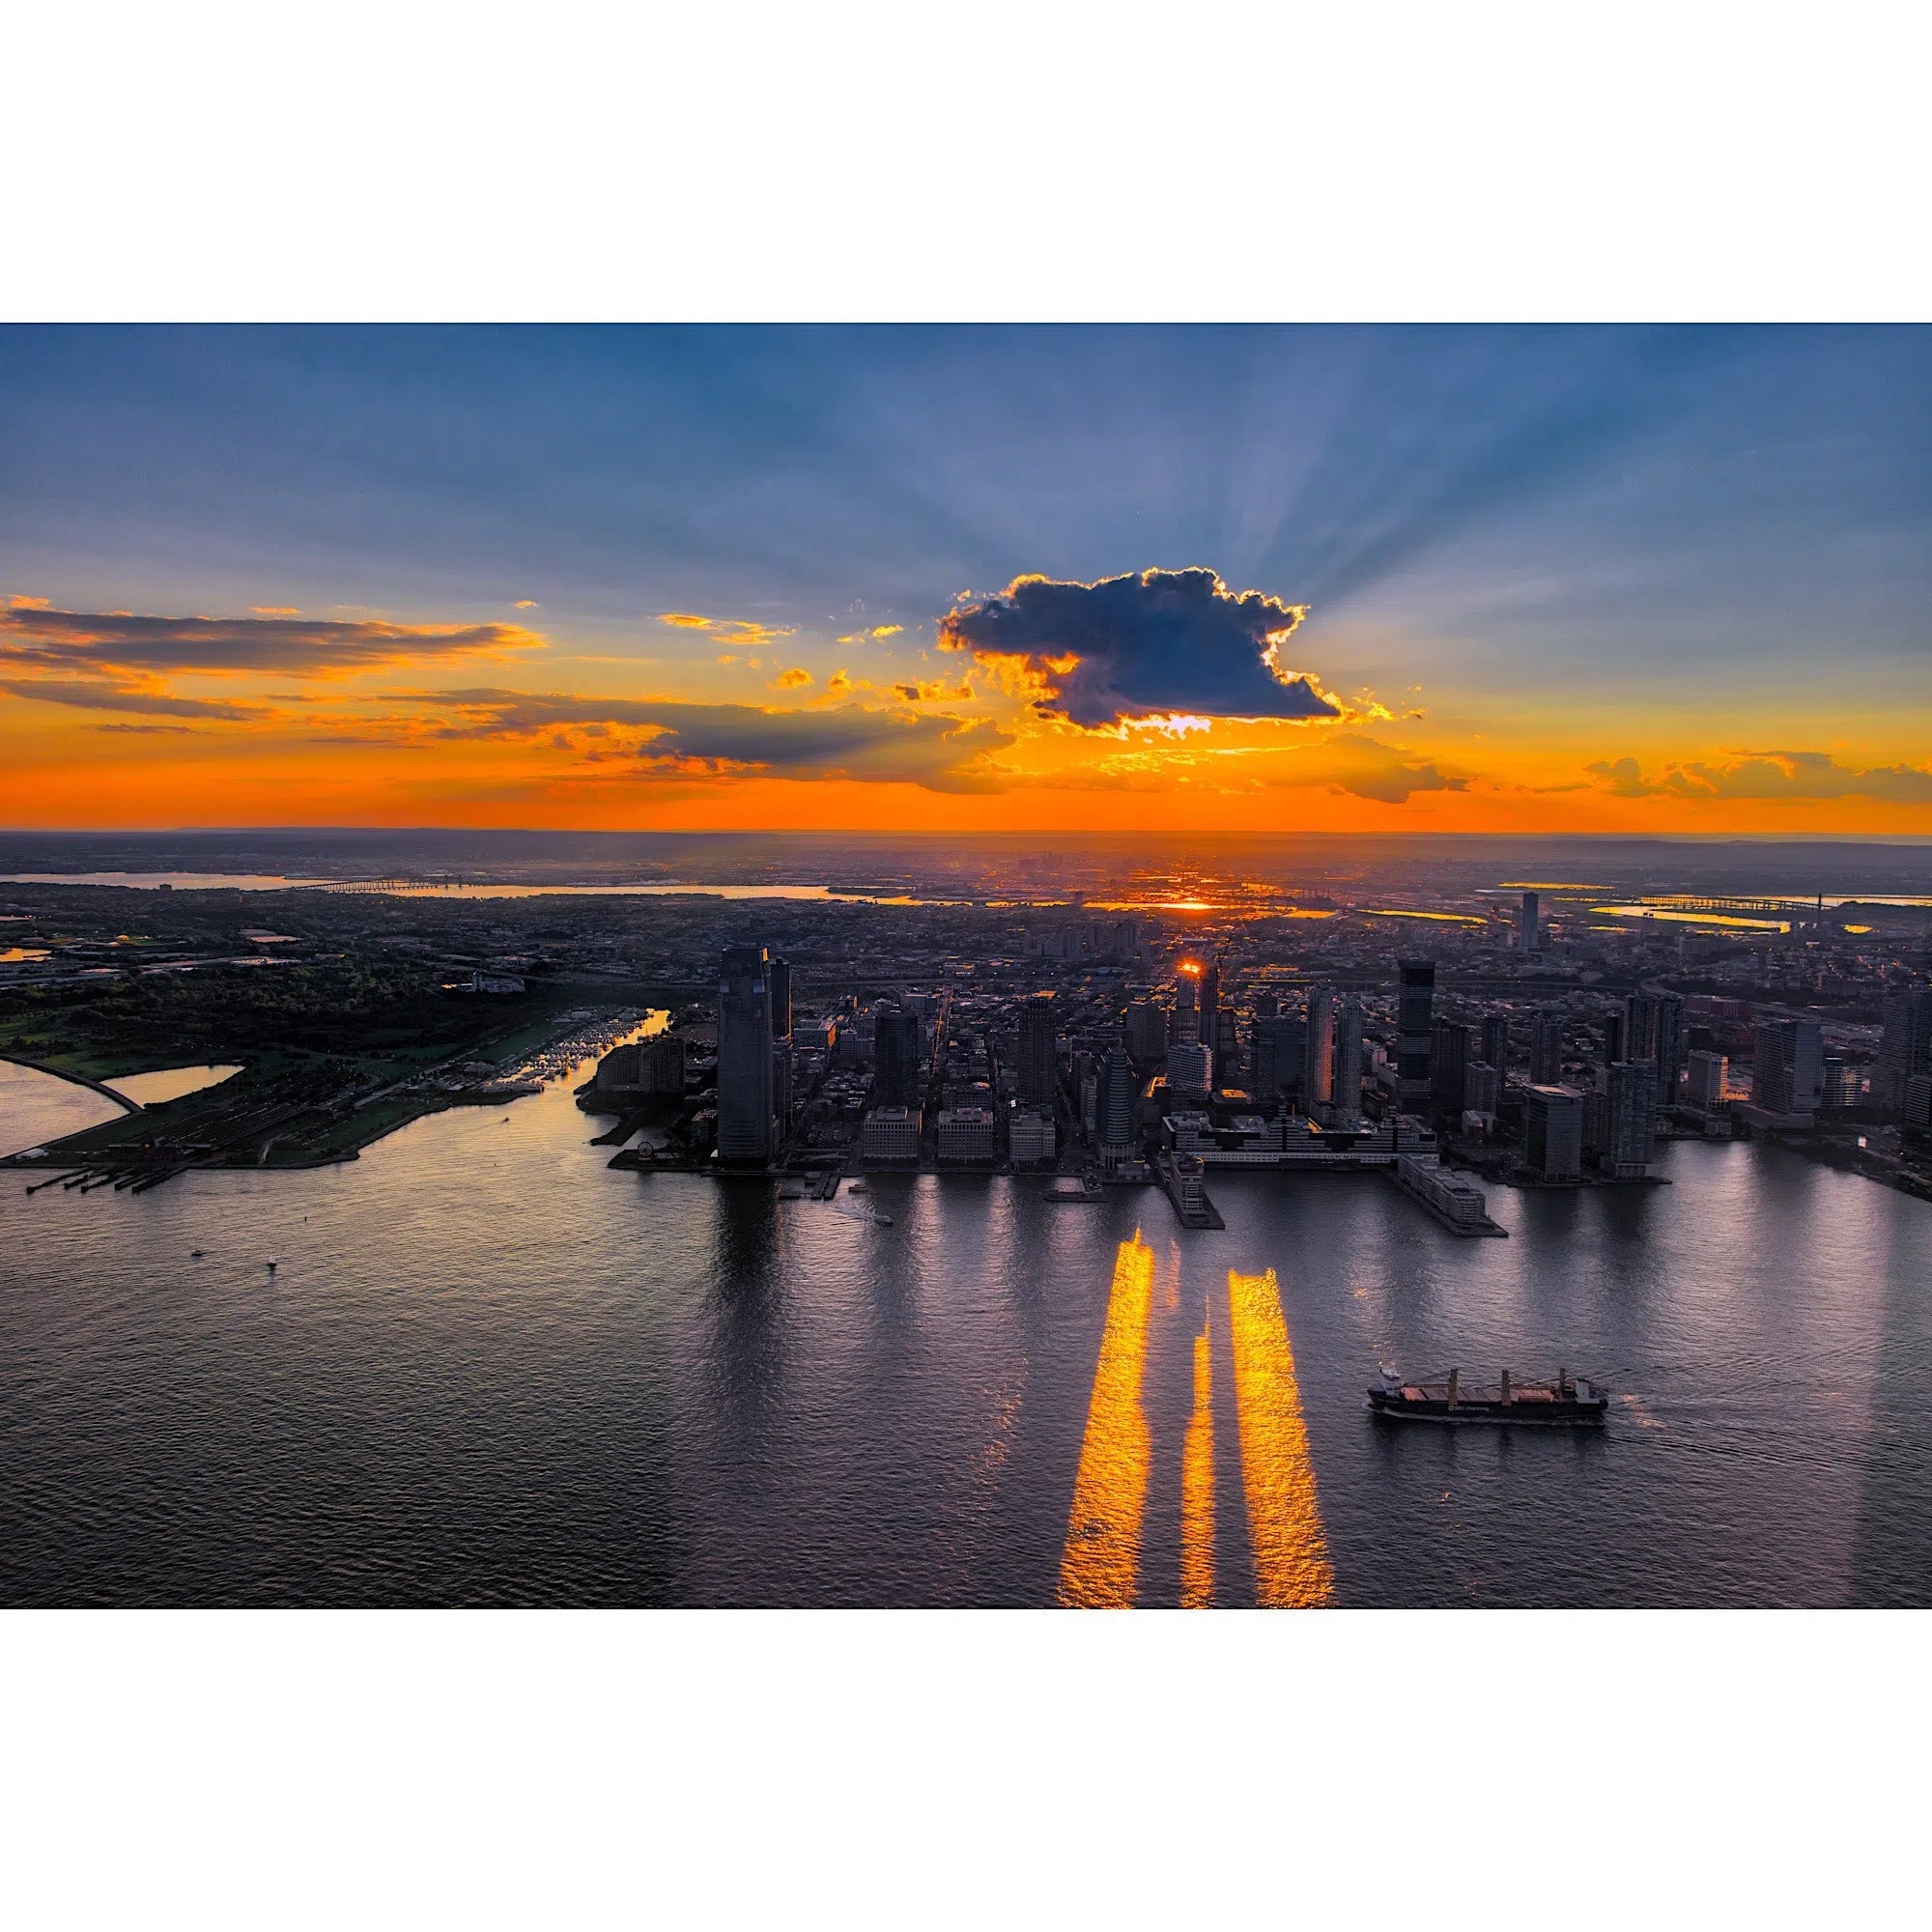 From New York to New Jersey, at dawn-Imagesdartistes